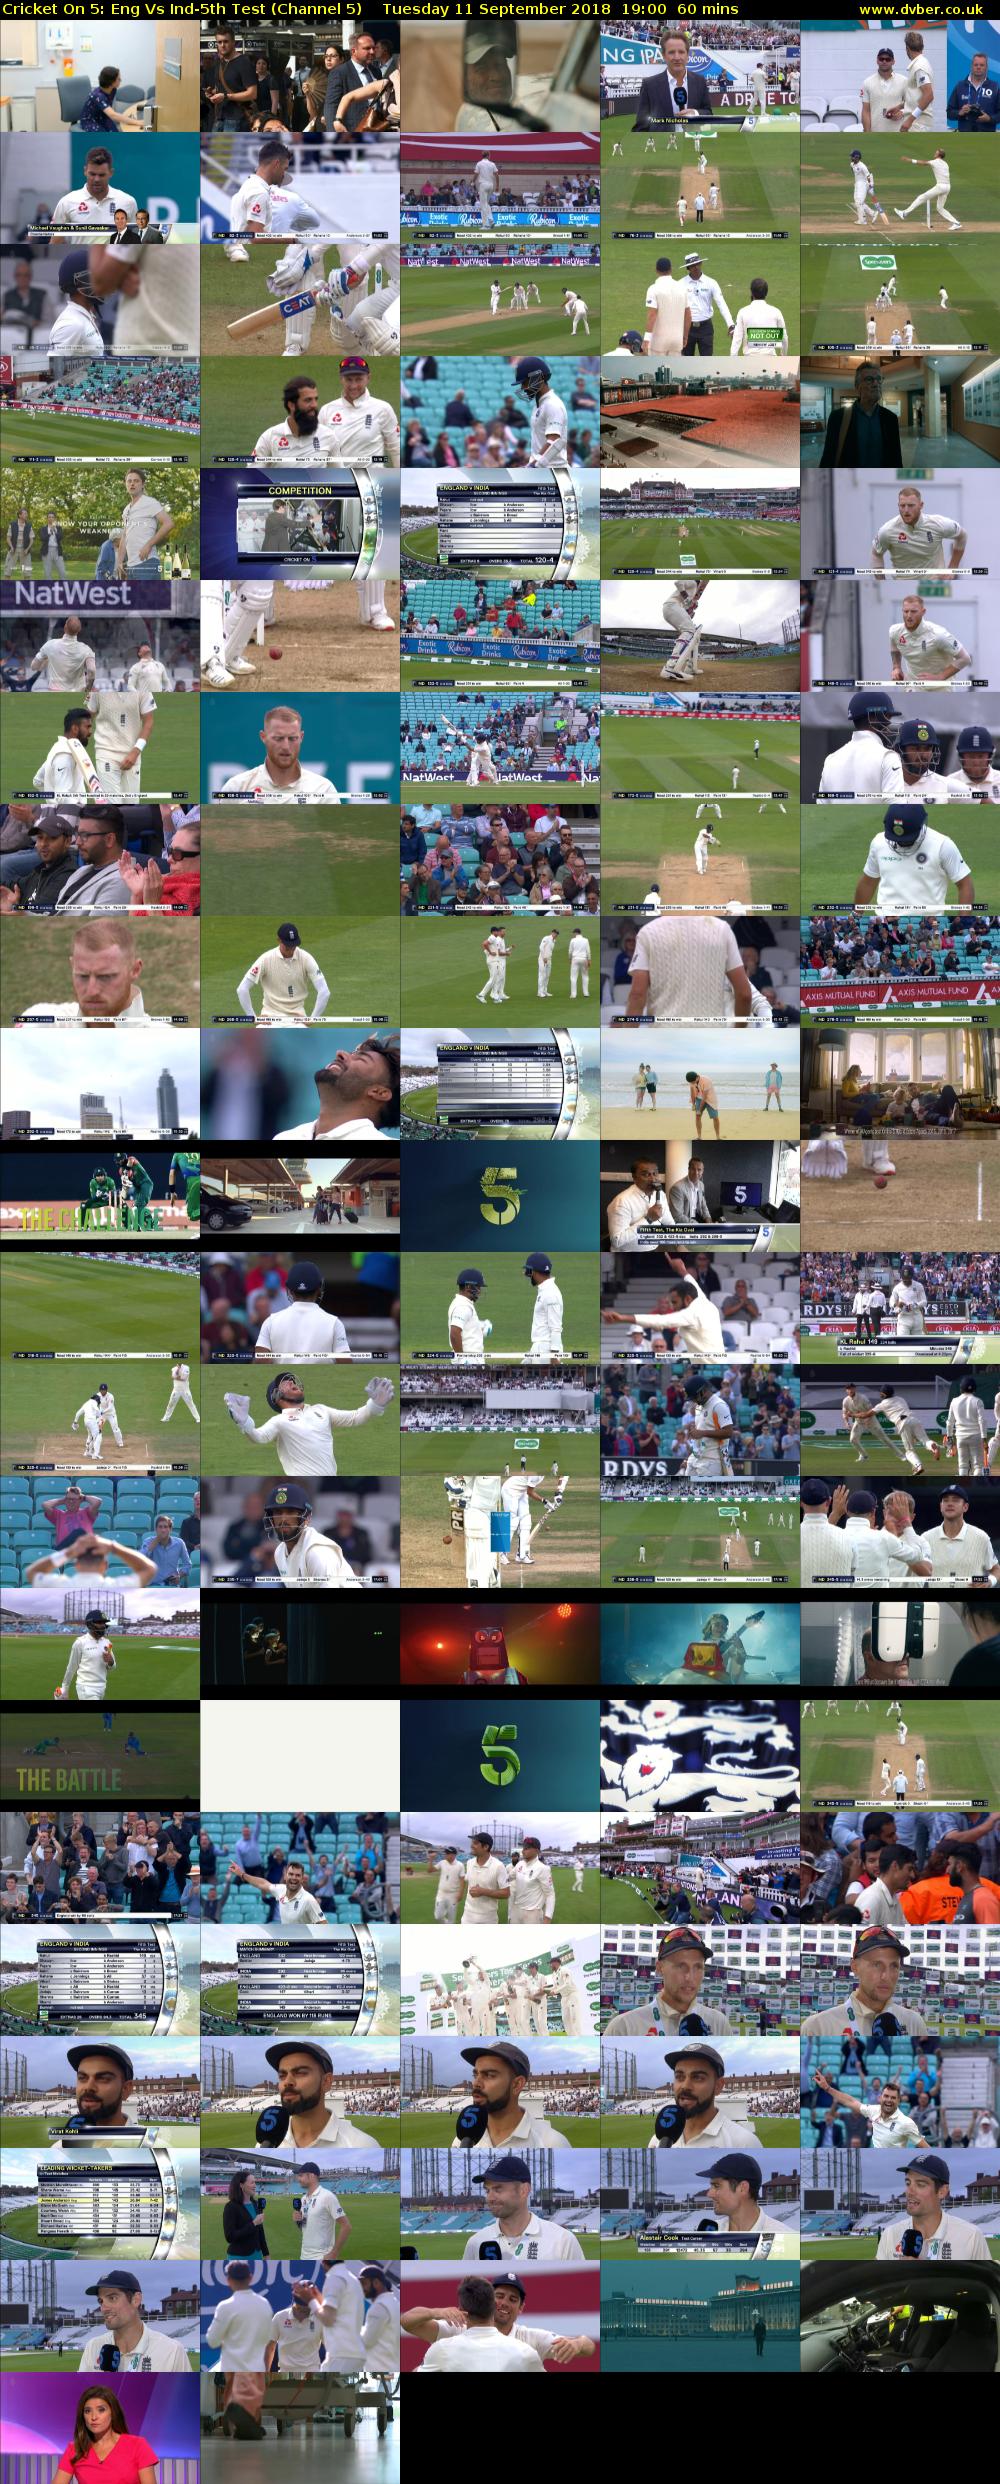 Cricket On 5: Eng Vs Ind-5th Test (Channel 5) Tuesday 11 September 2018 19:00 - 20:00